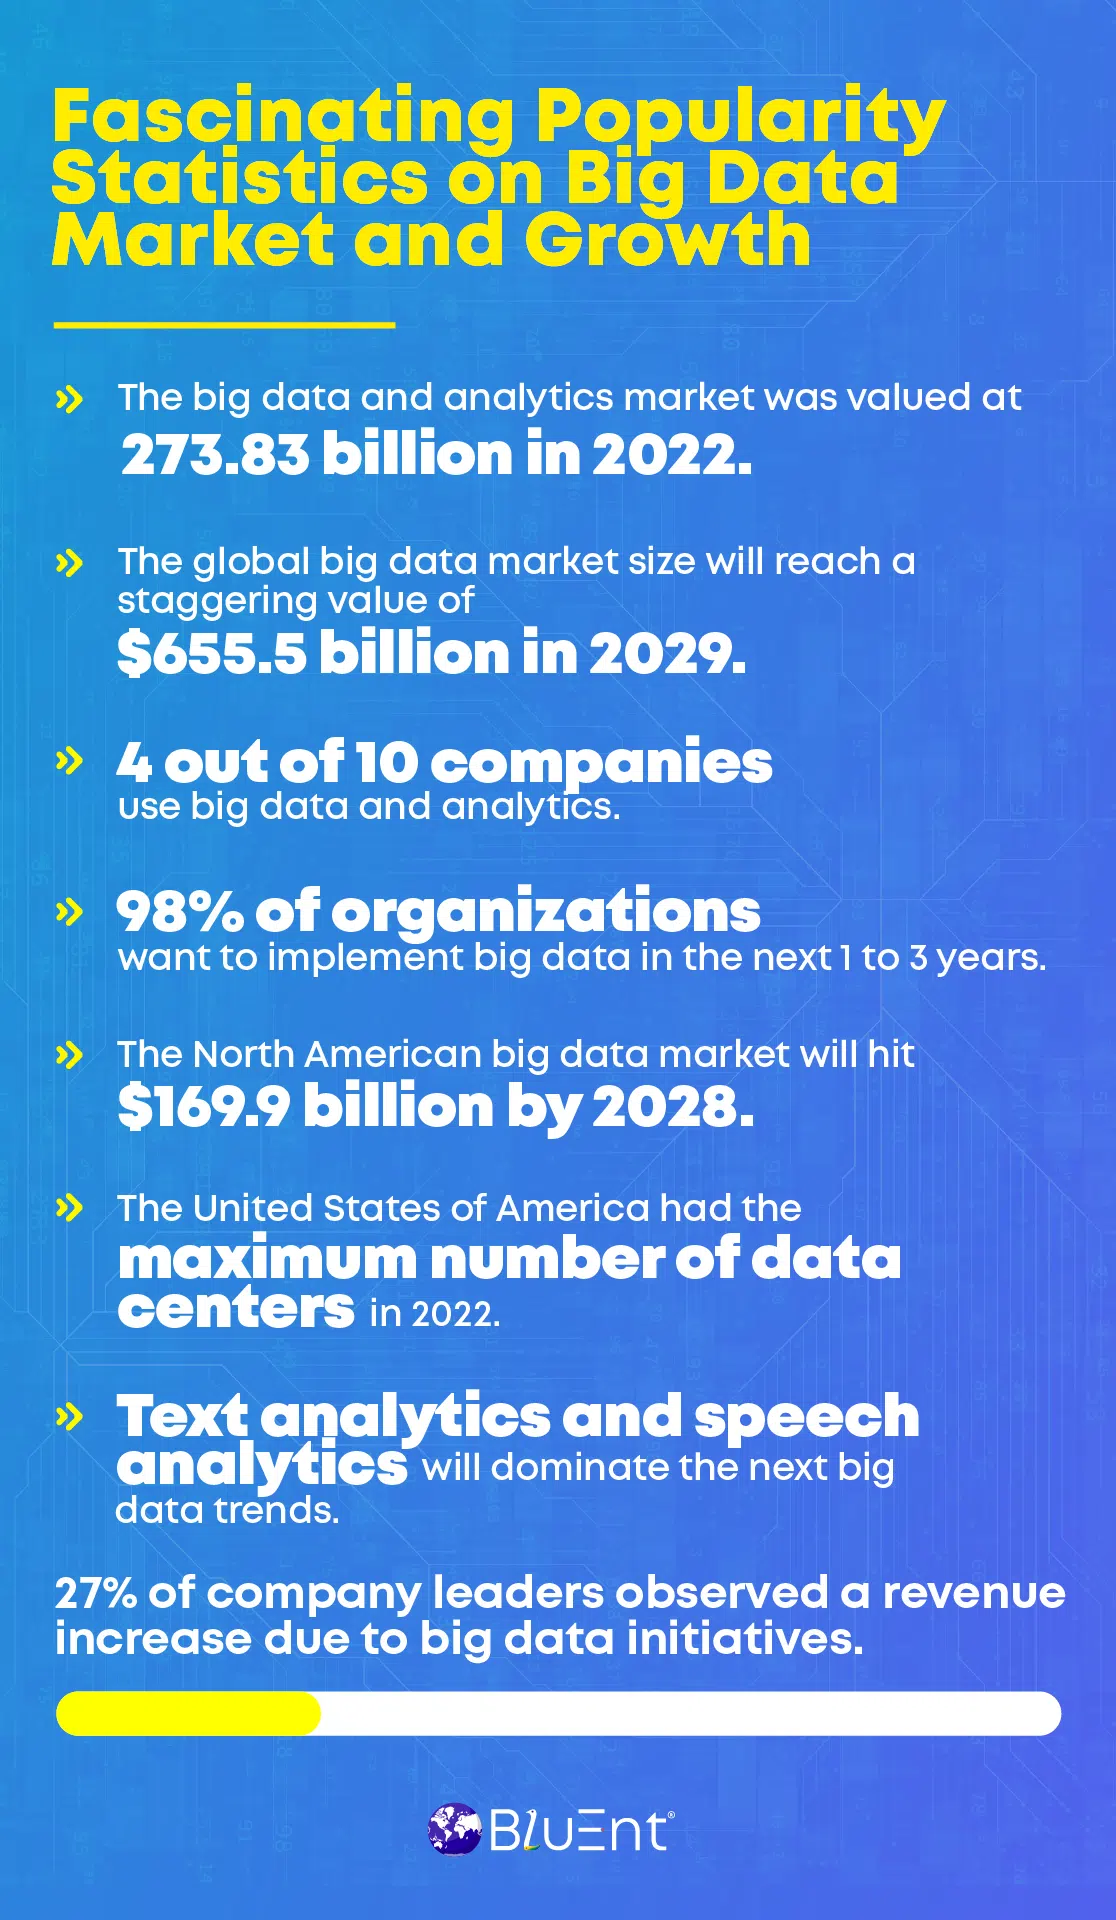 Fascinating Popularity Stats and Facts on Big Data Market & Growth